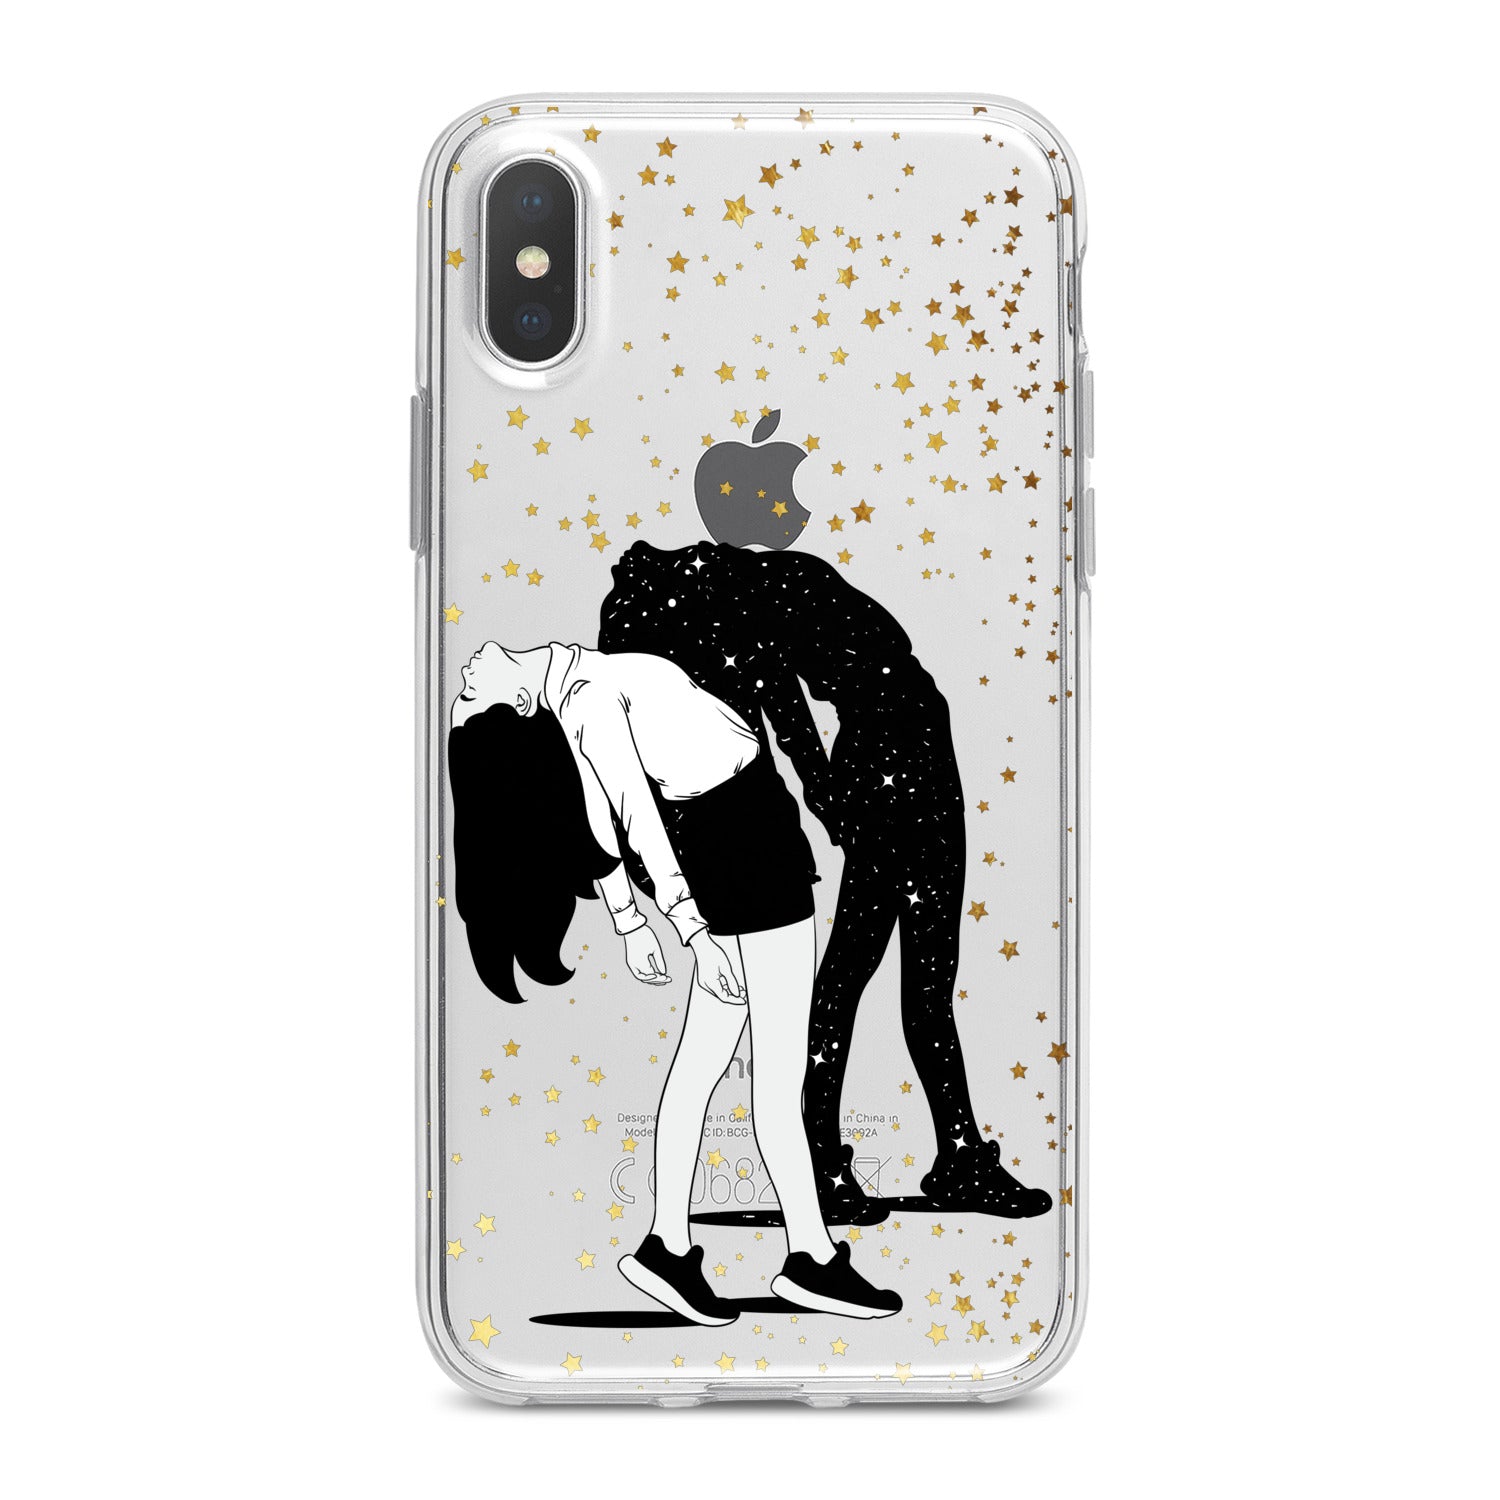 Lex Altern Cute Teen Girl Phone Case for your iPhone & Android phone.